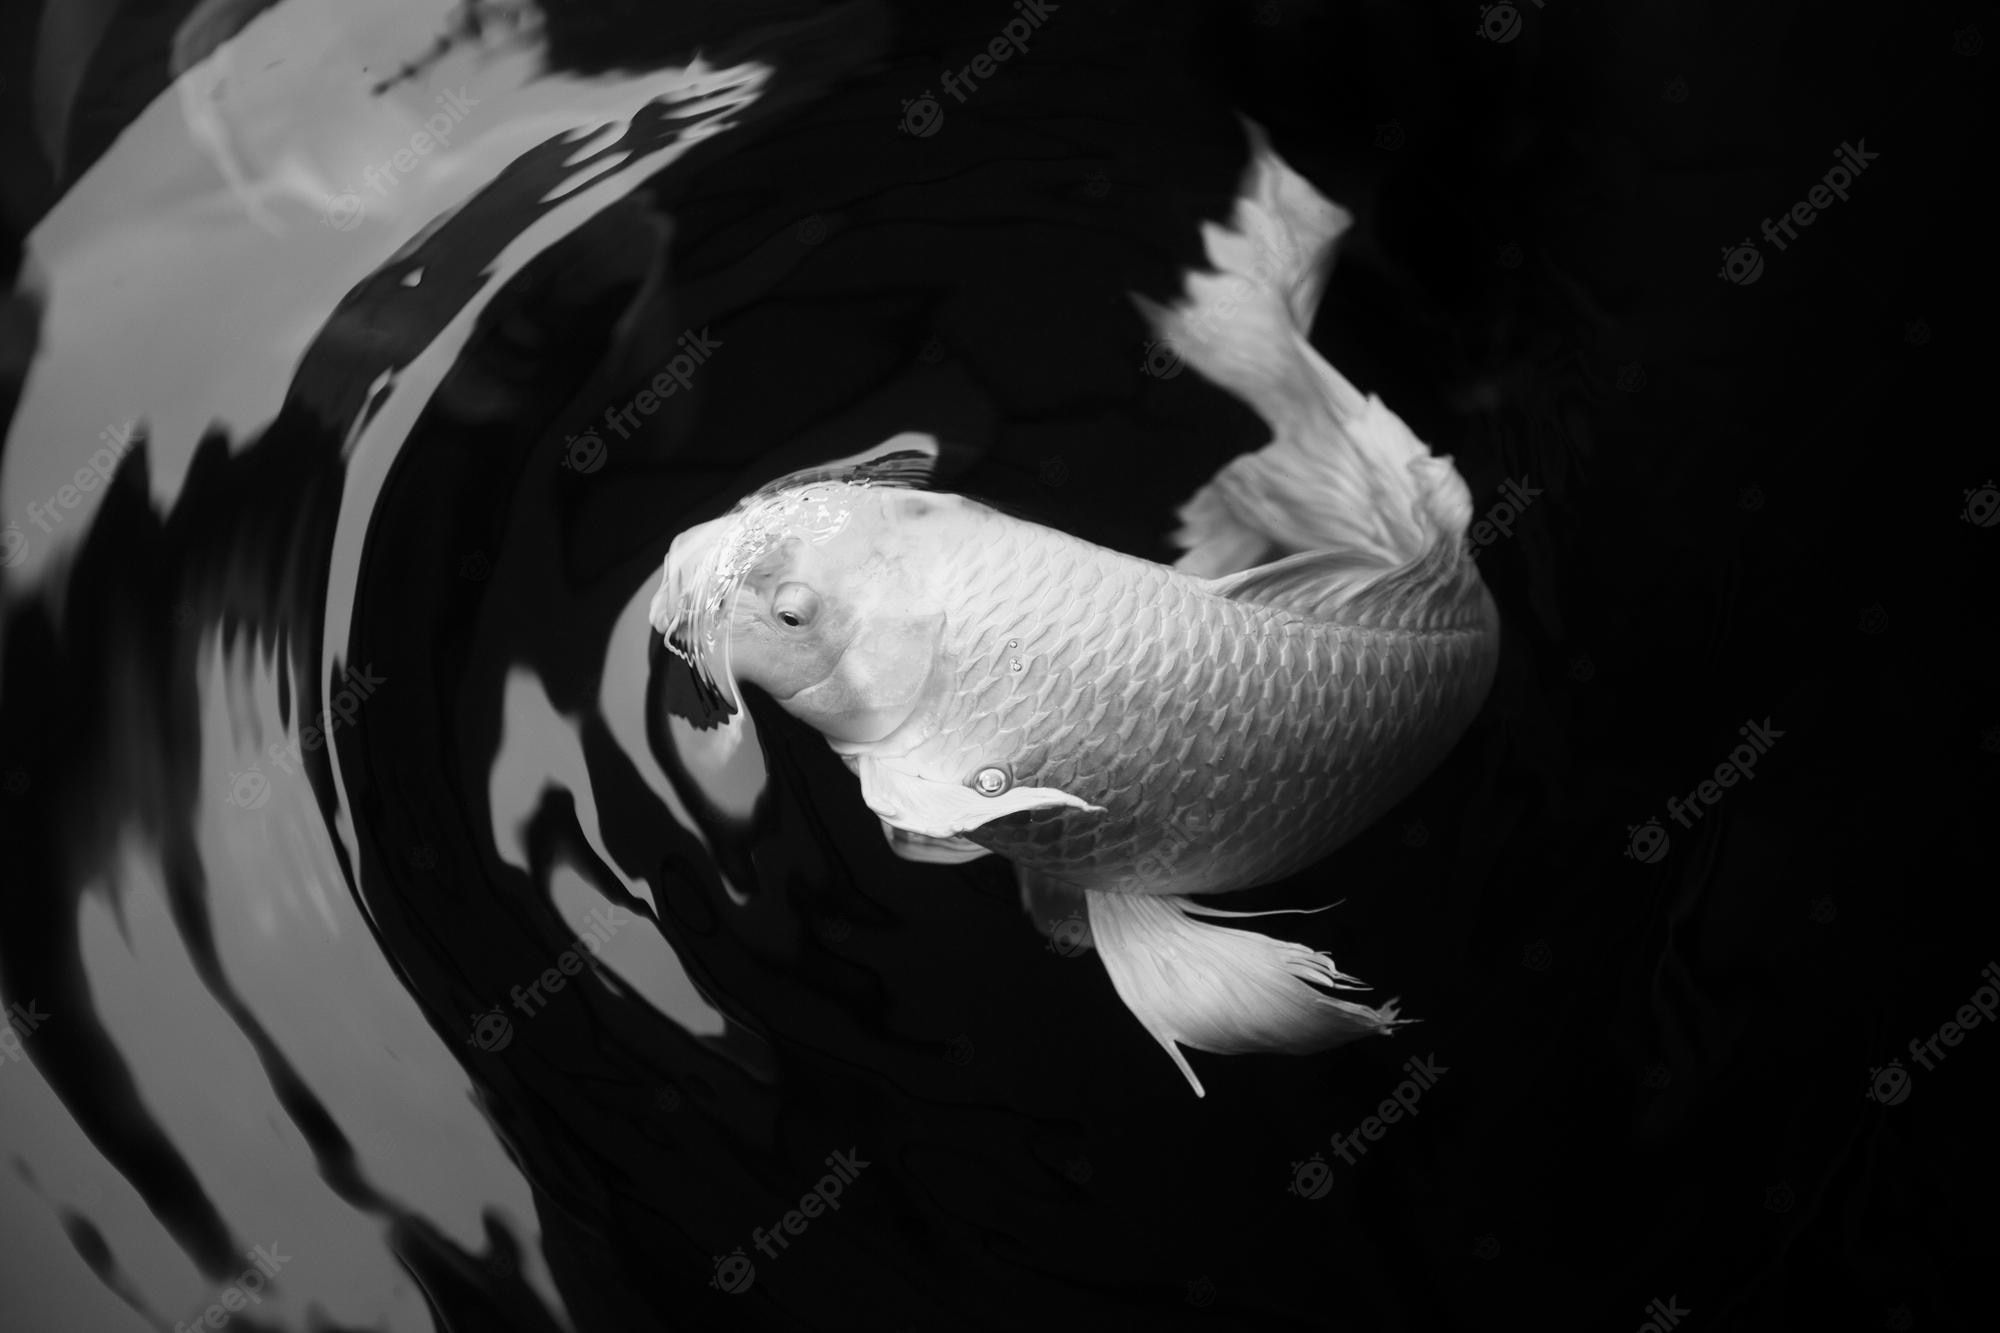 A white fish in the water - Koi fish